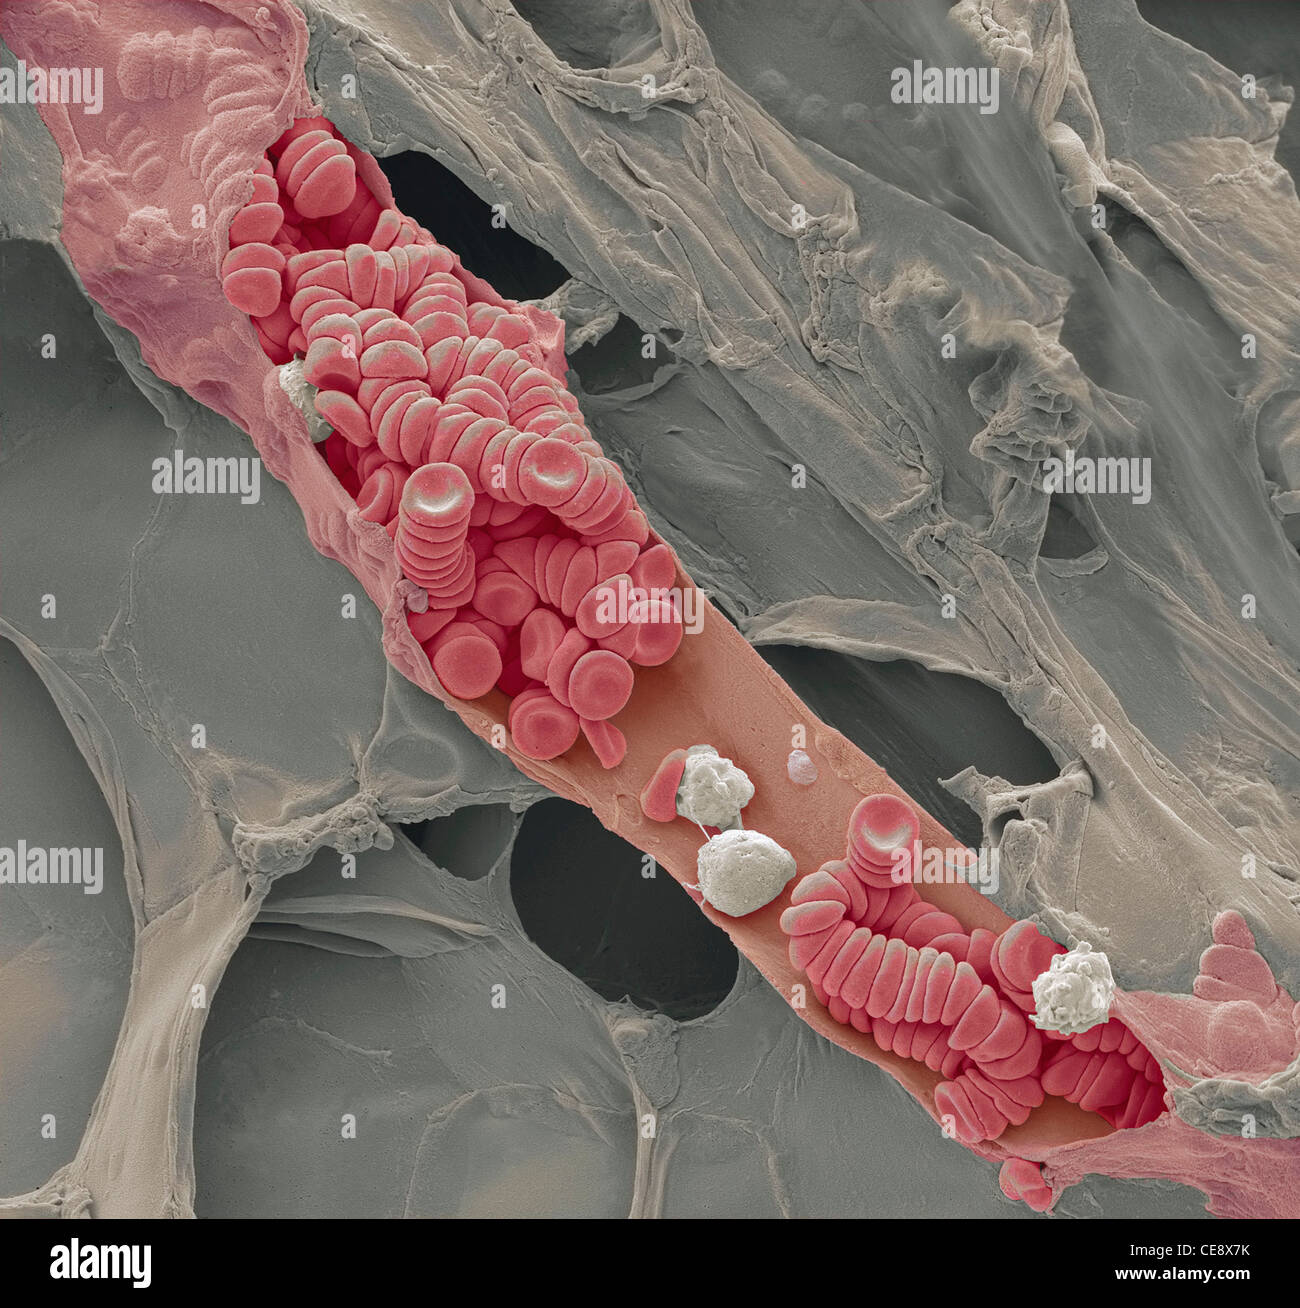 Ruptured venule Coloured scanning electron micrograph SEM ruptured venule running through fatty tissue  Stacked red blood cells Stock Photo